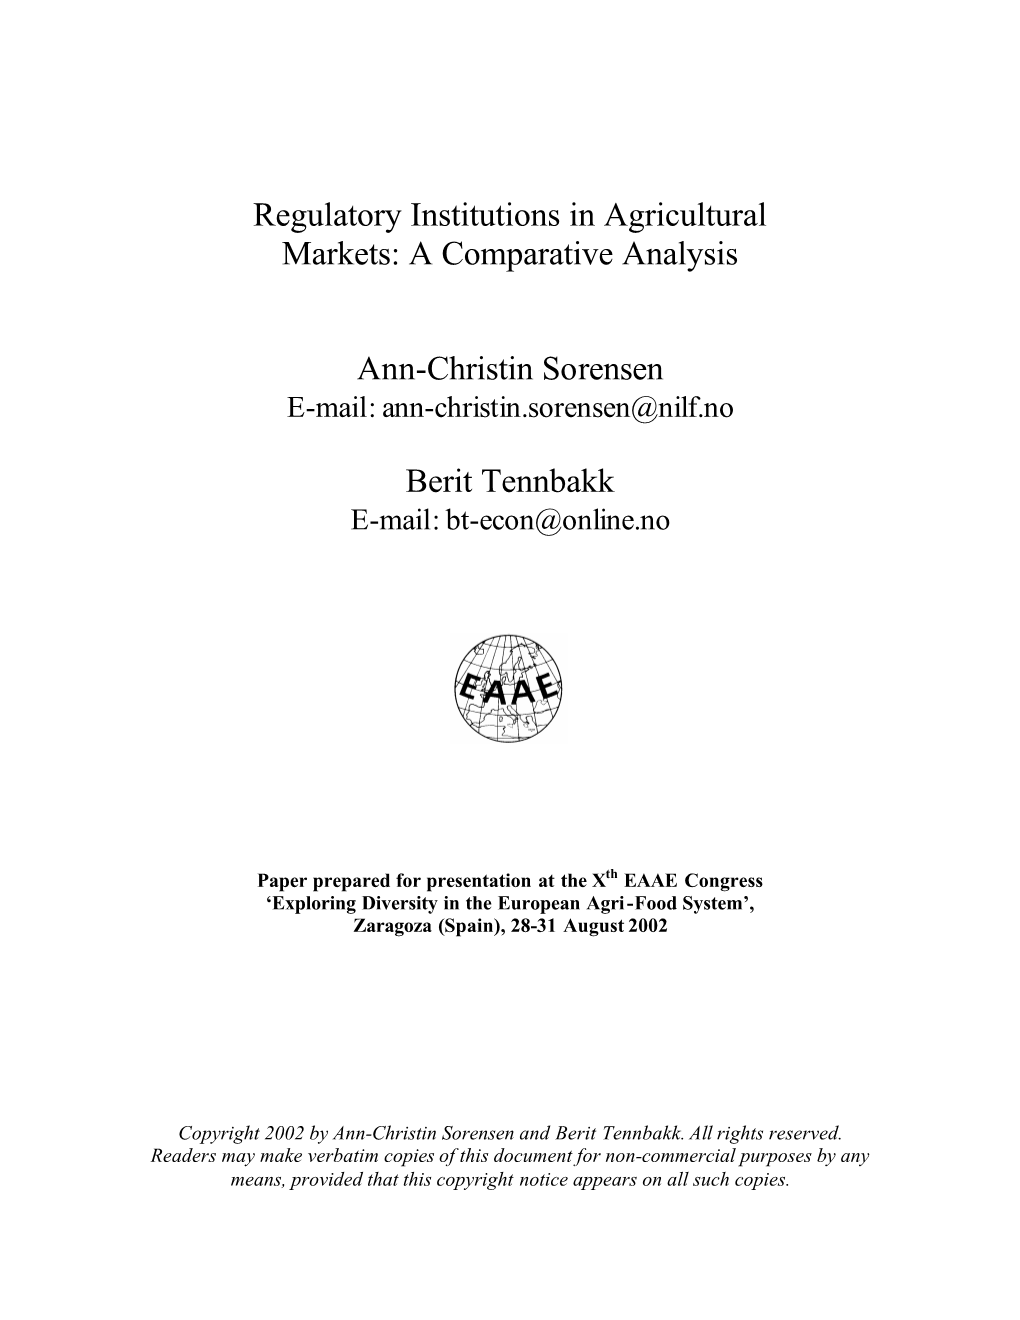 Regulatory Institutions in Agricultural Markets: a Comparative Analysis